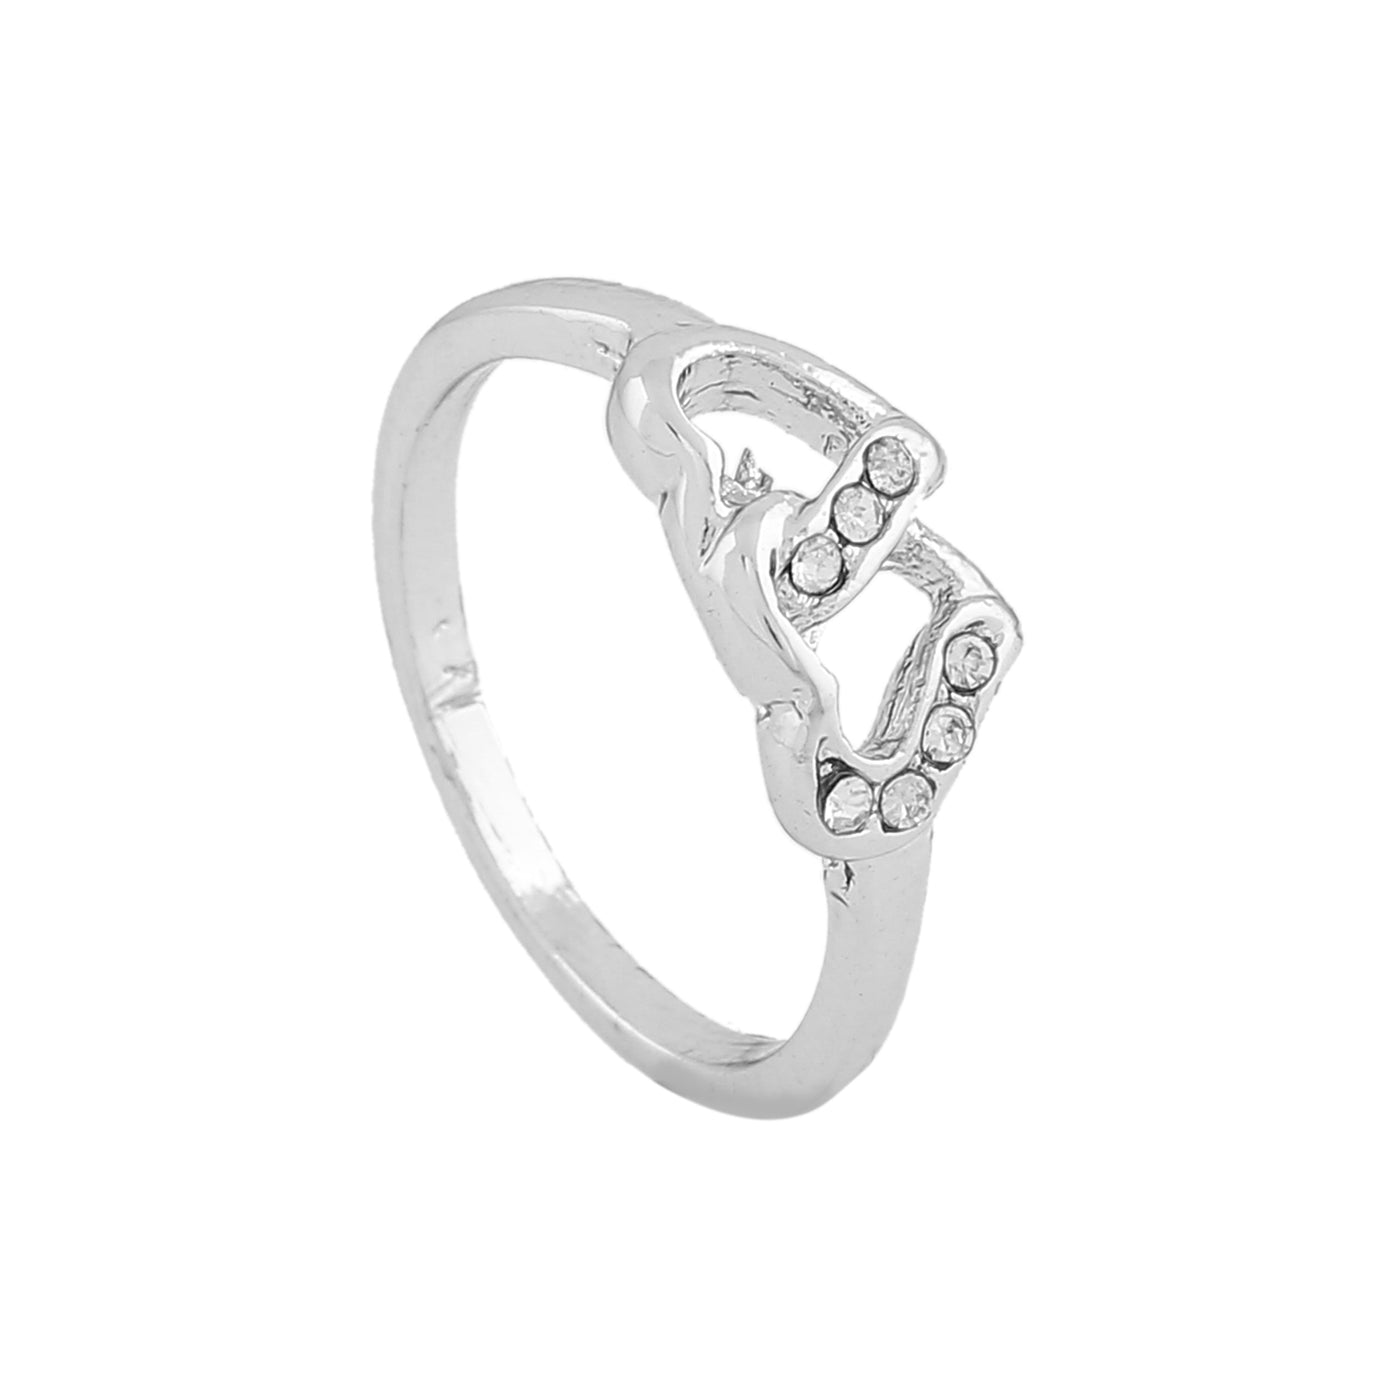 Estele Rhodium Plated Entwisted Heart Shaped Finger Ring with Crystals for Women